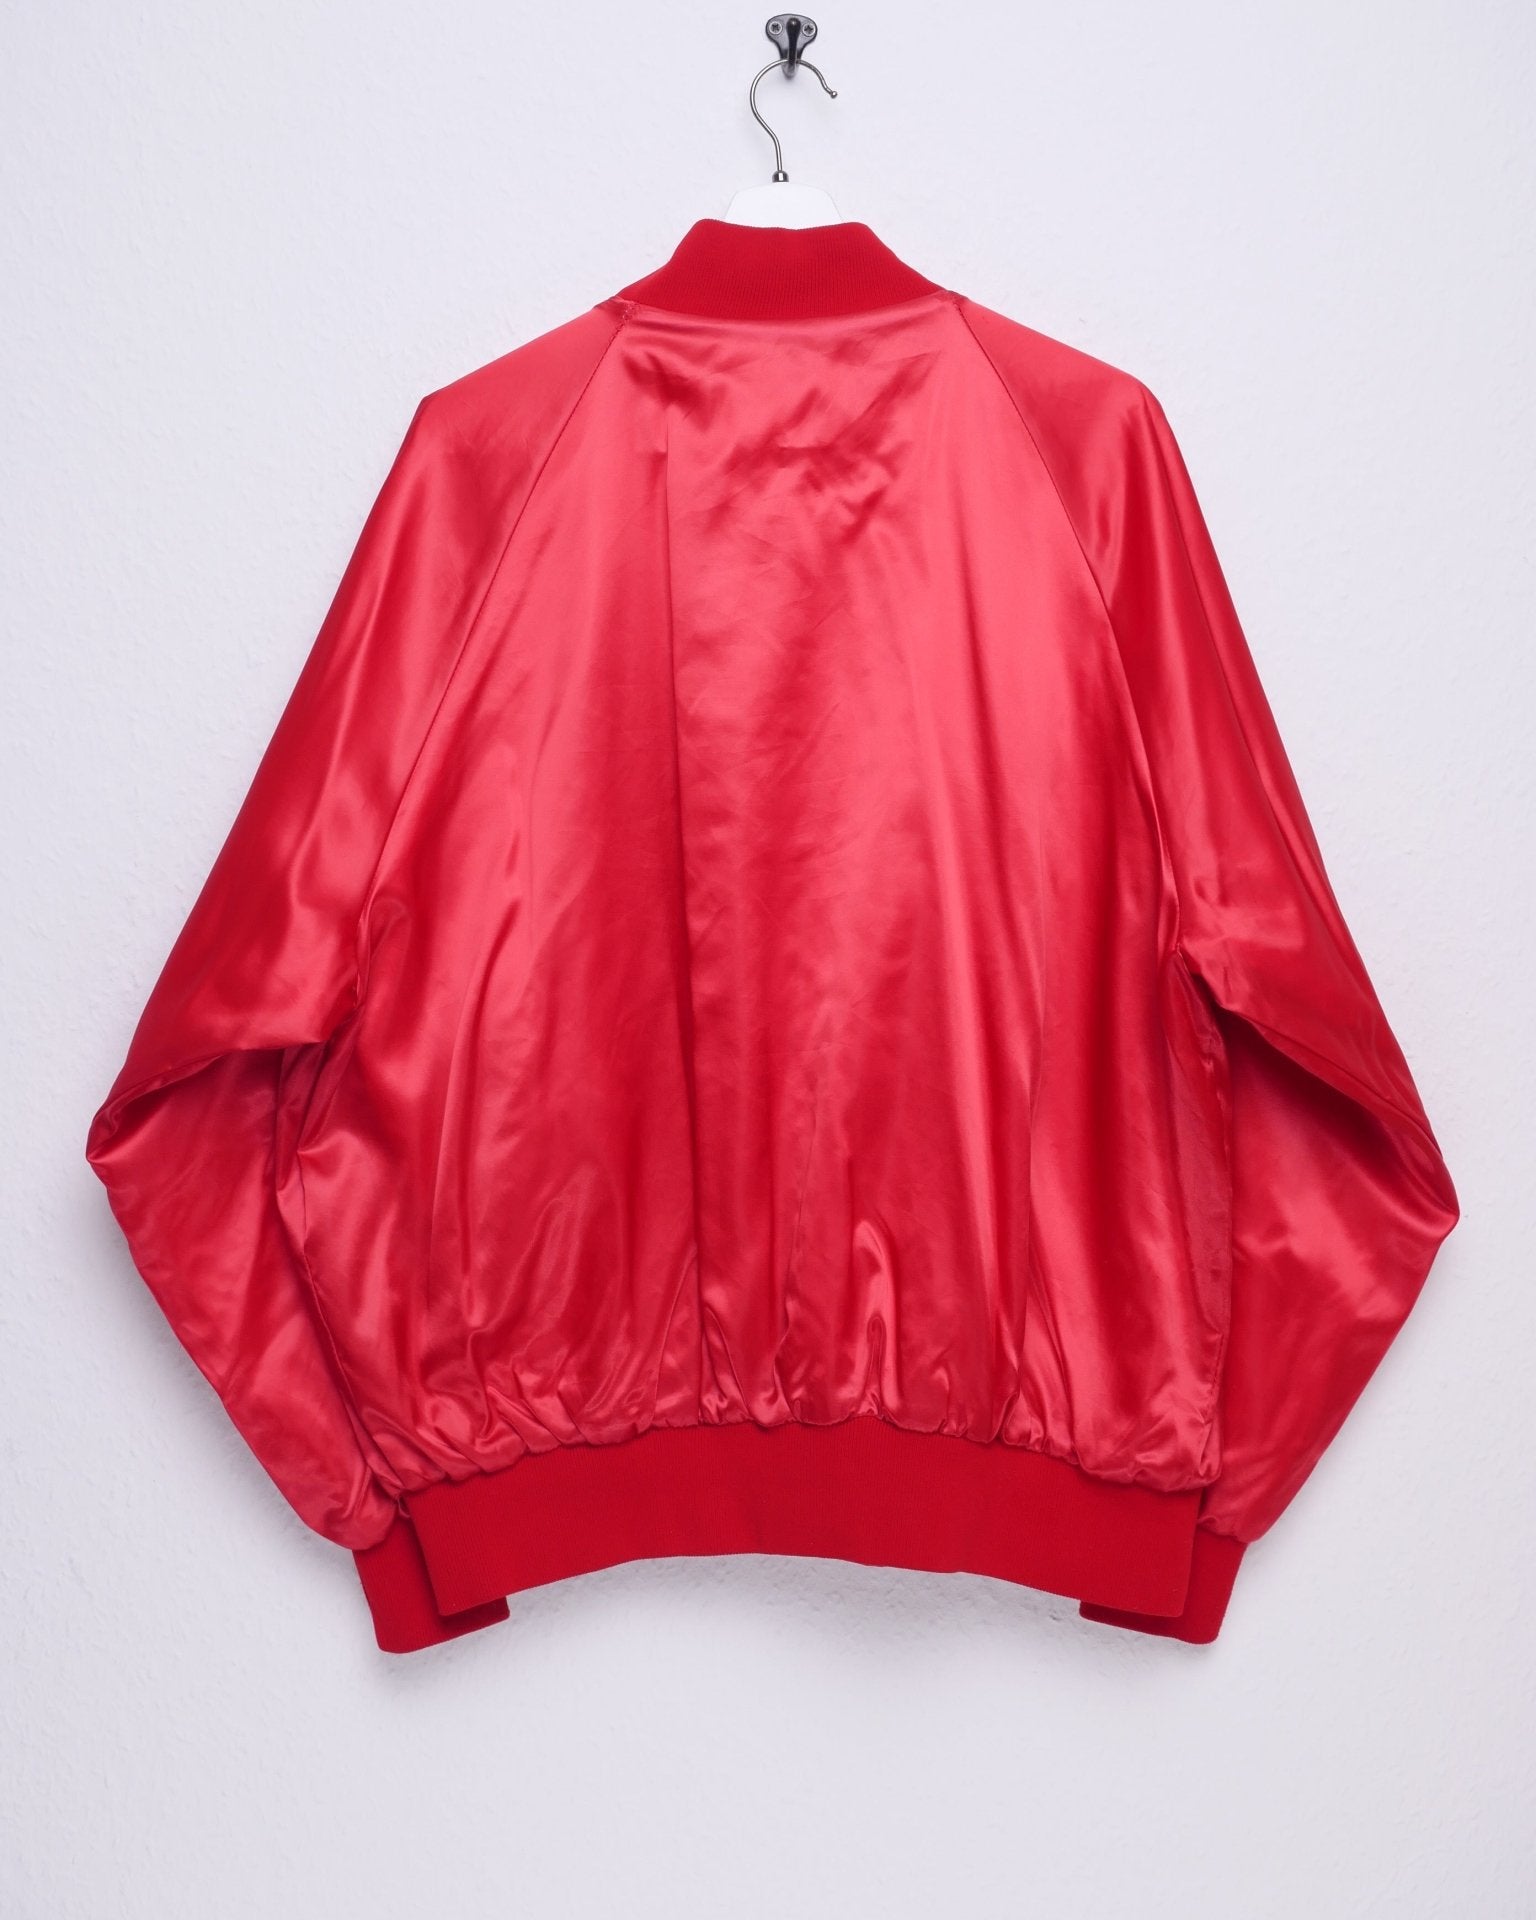 'Leadline' embroidered Graphic red Bomber Jacke - Peeces